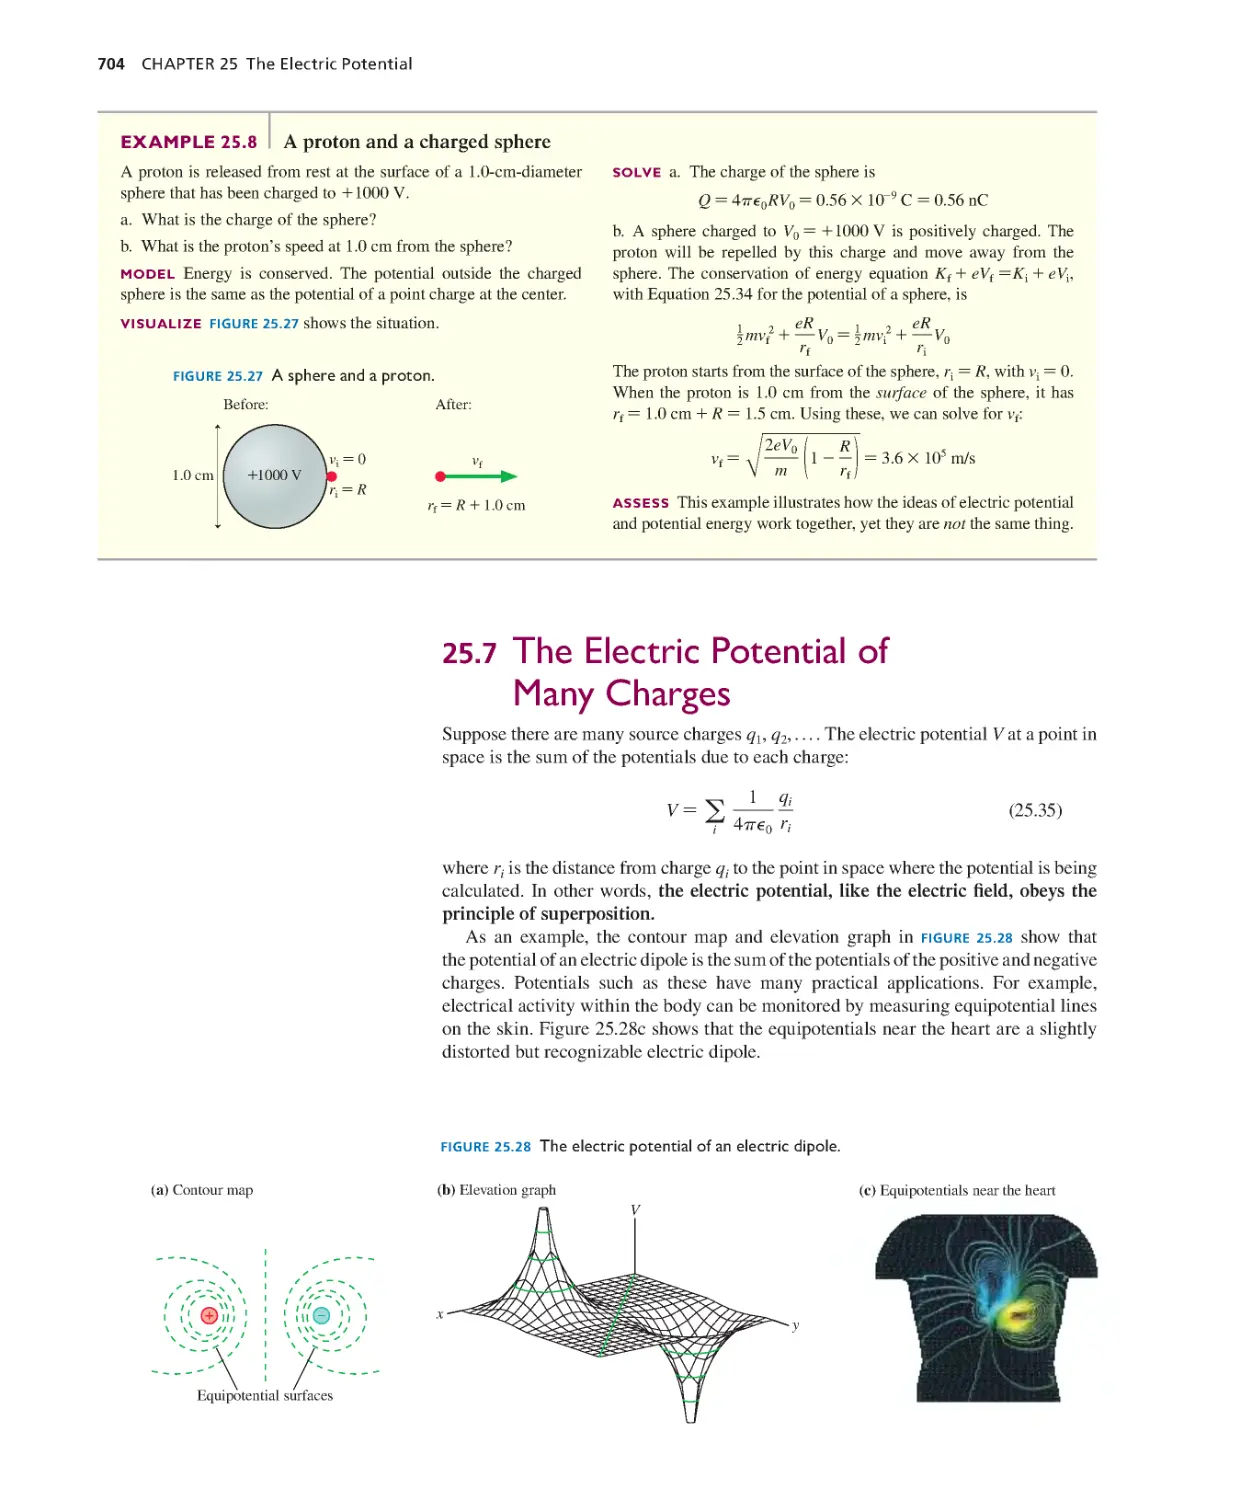 25.7. The Electric Potential of Many Charges